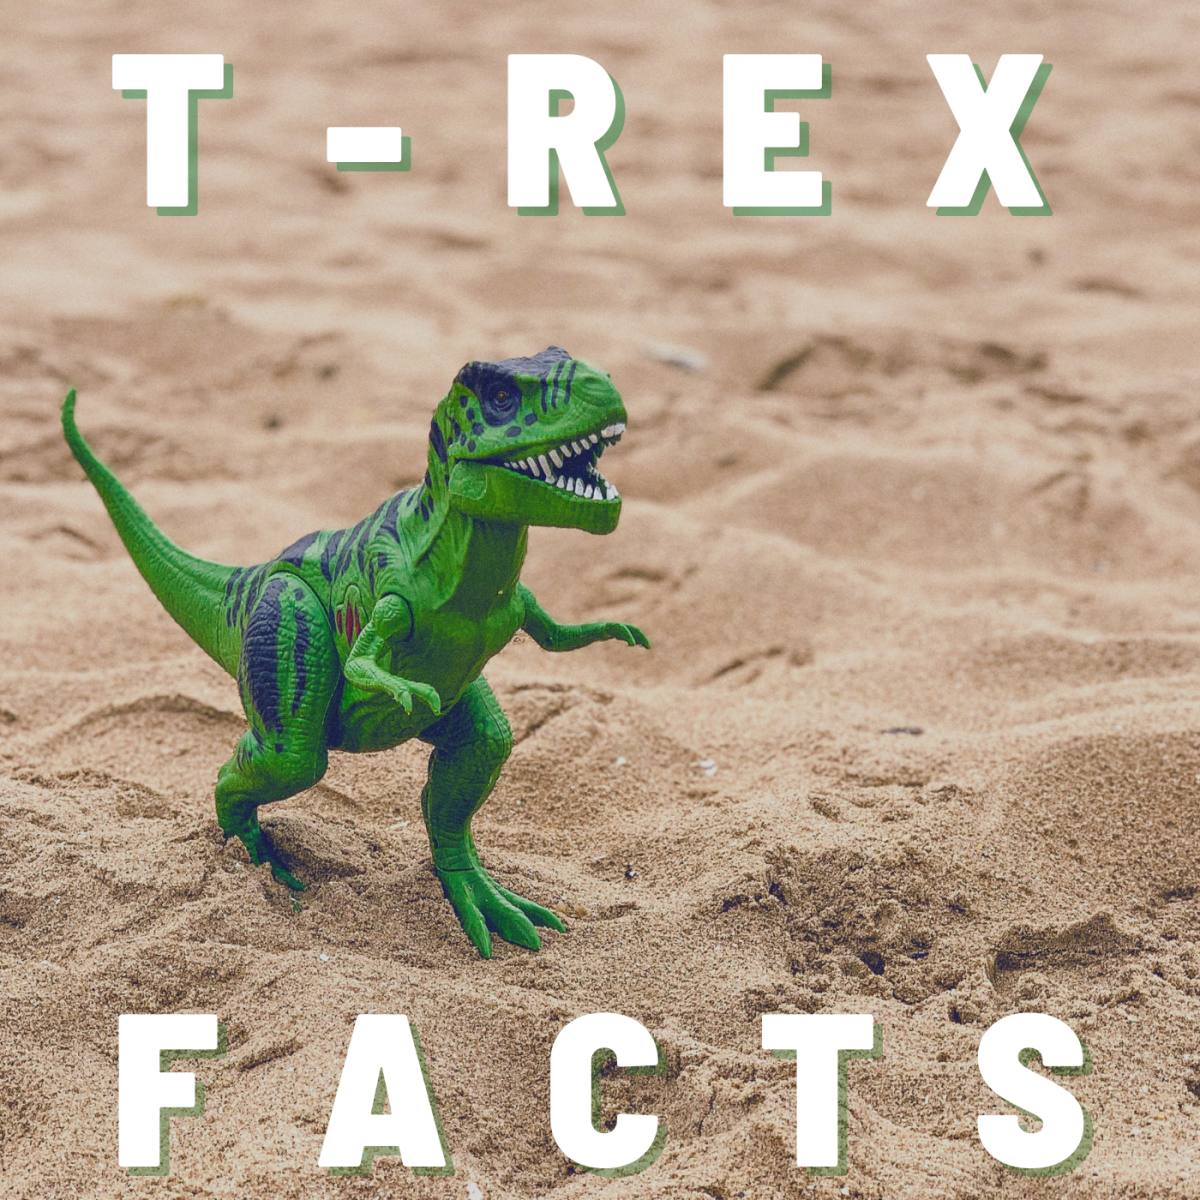 Quick facts about the terrifying T-Rex